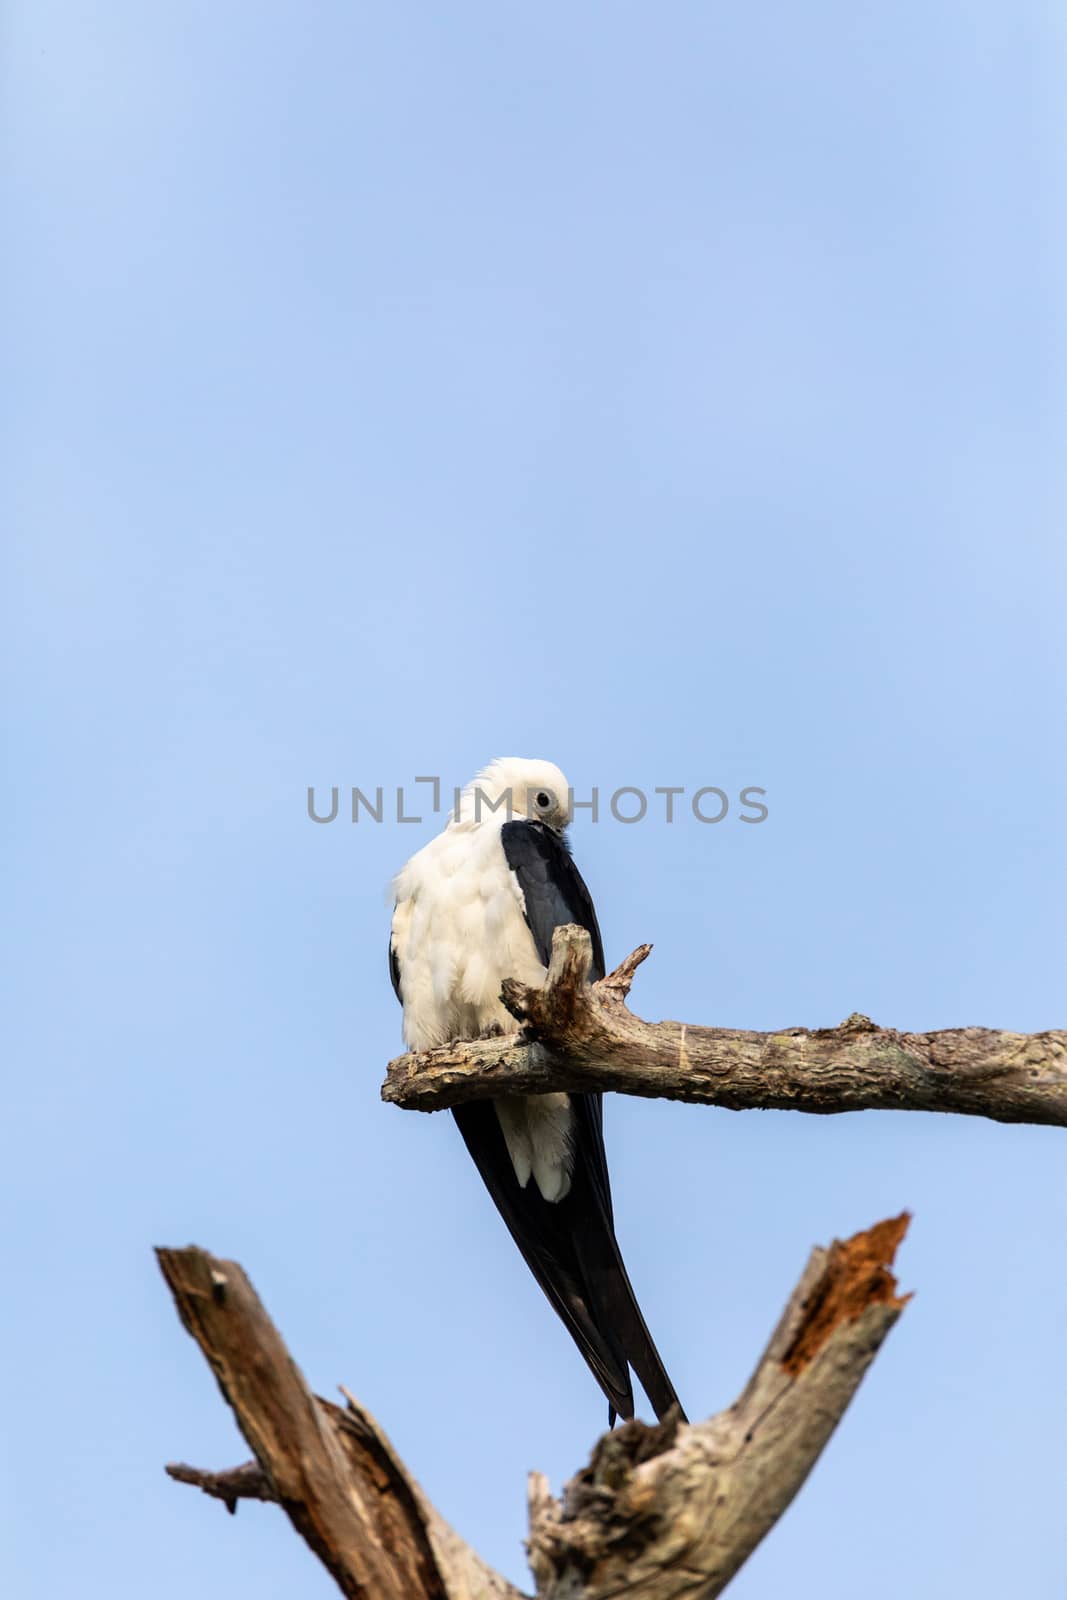 White and grey male swallow-tailed kite Elanoides forficatus per by steffstarr